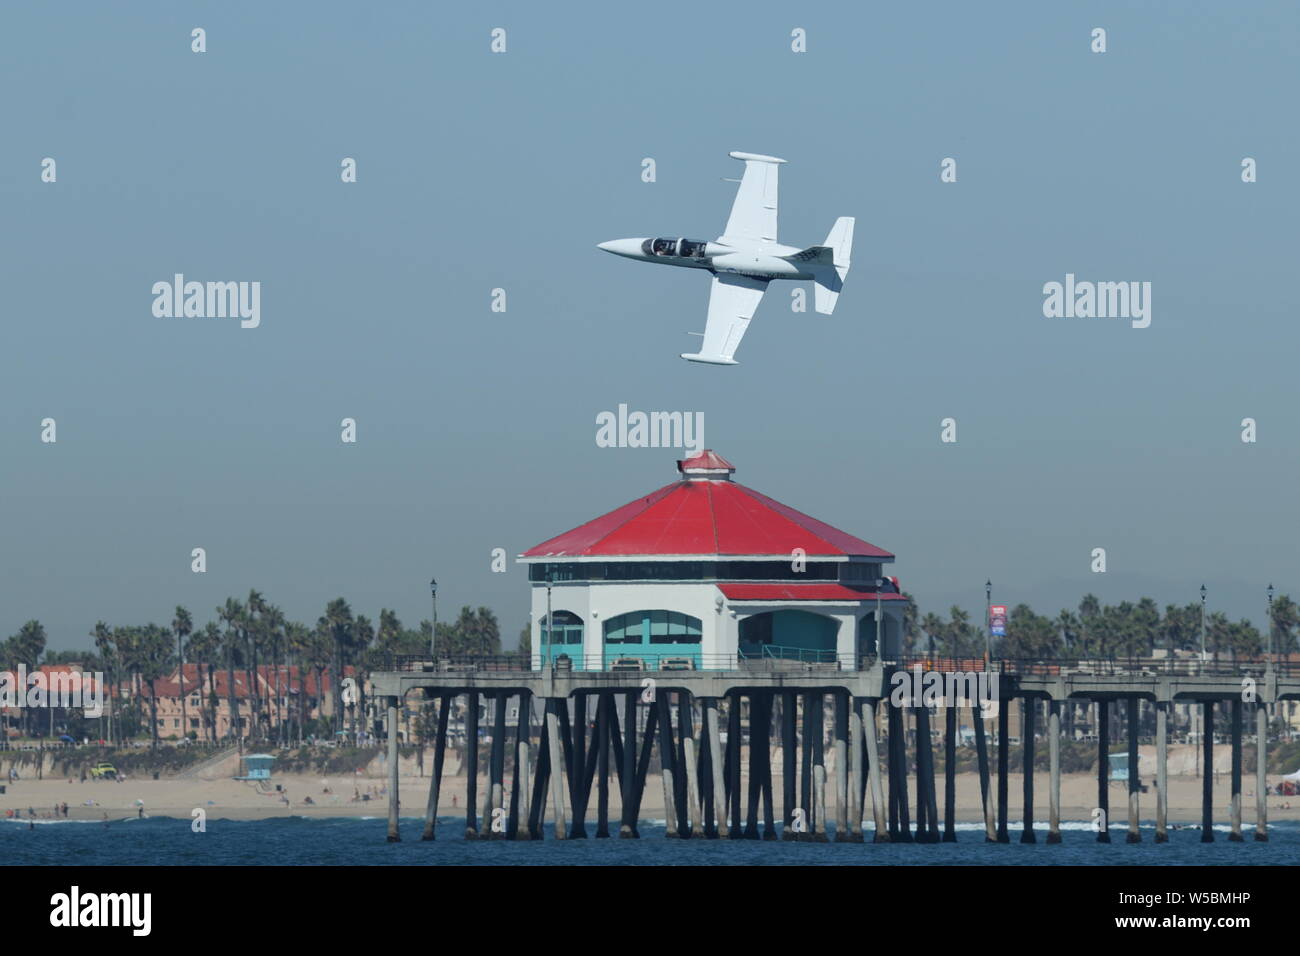 Aero L-39 Albatros flies over Ruby's Surf City Diner on the pier during the Great Pacific Airshow in Huntington Beach, California on October 19, 2018 Stock Photo